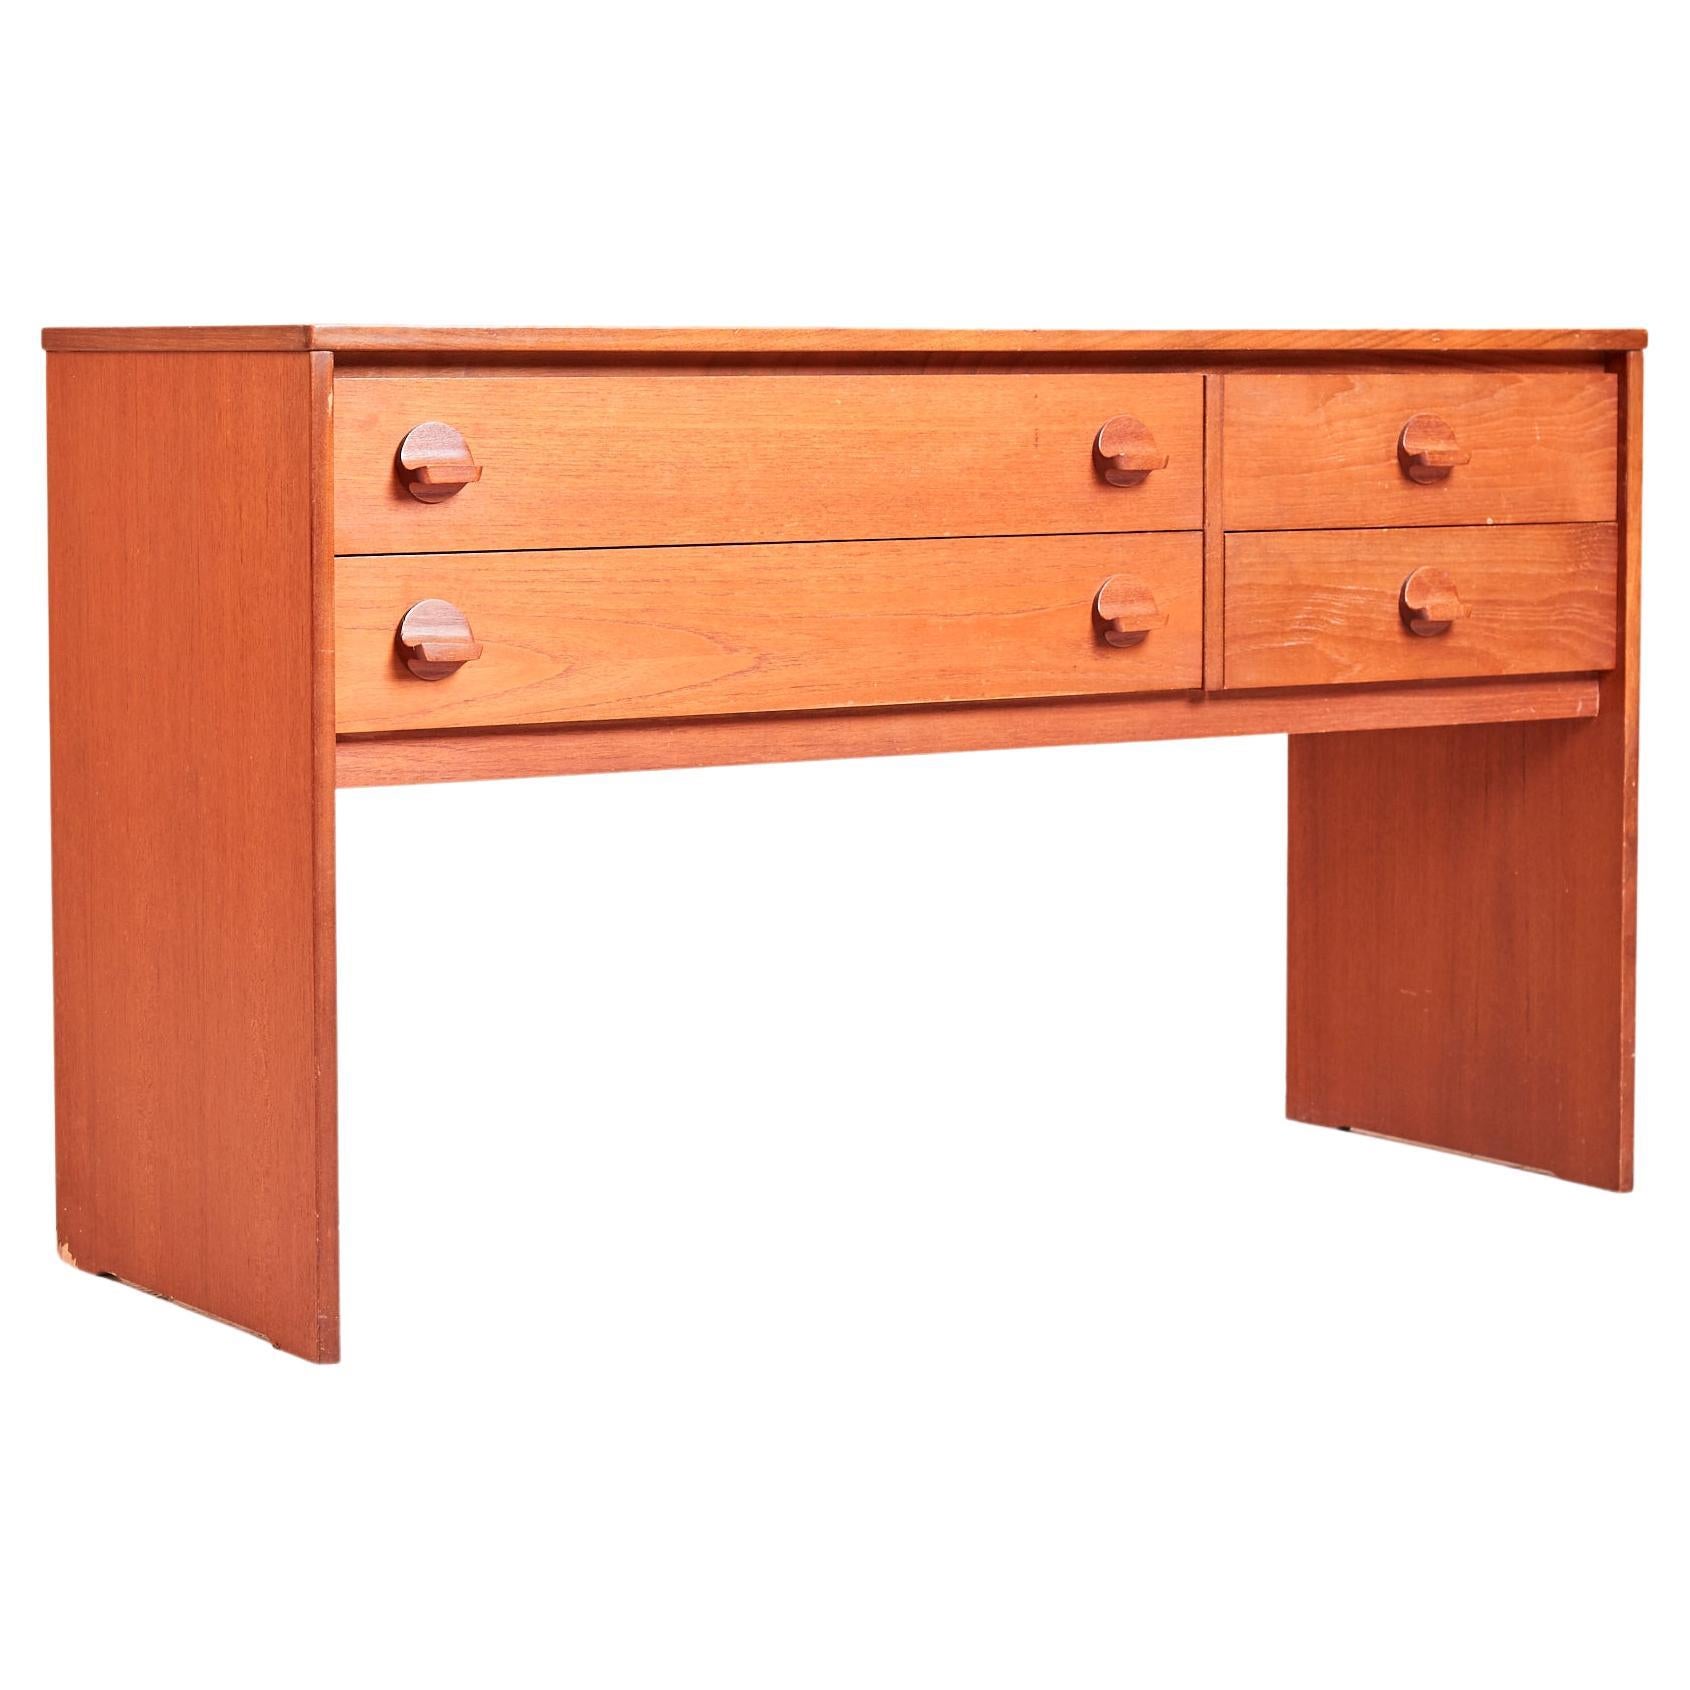 Stag Console With Drawers In Teak, Mid Century, John & Sylvia Reid, 1960s For Sale